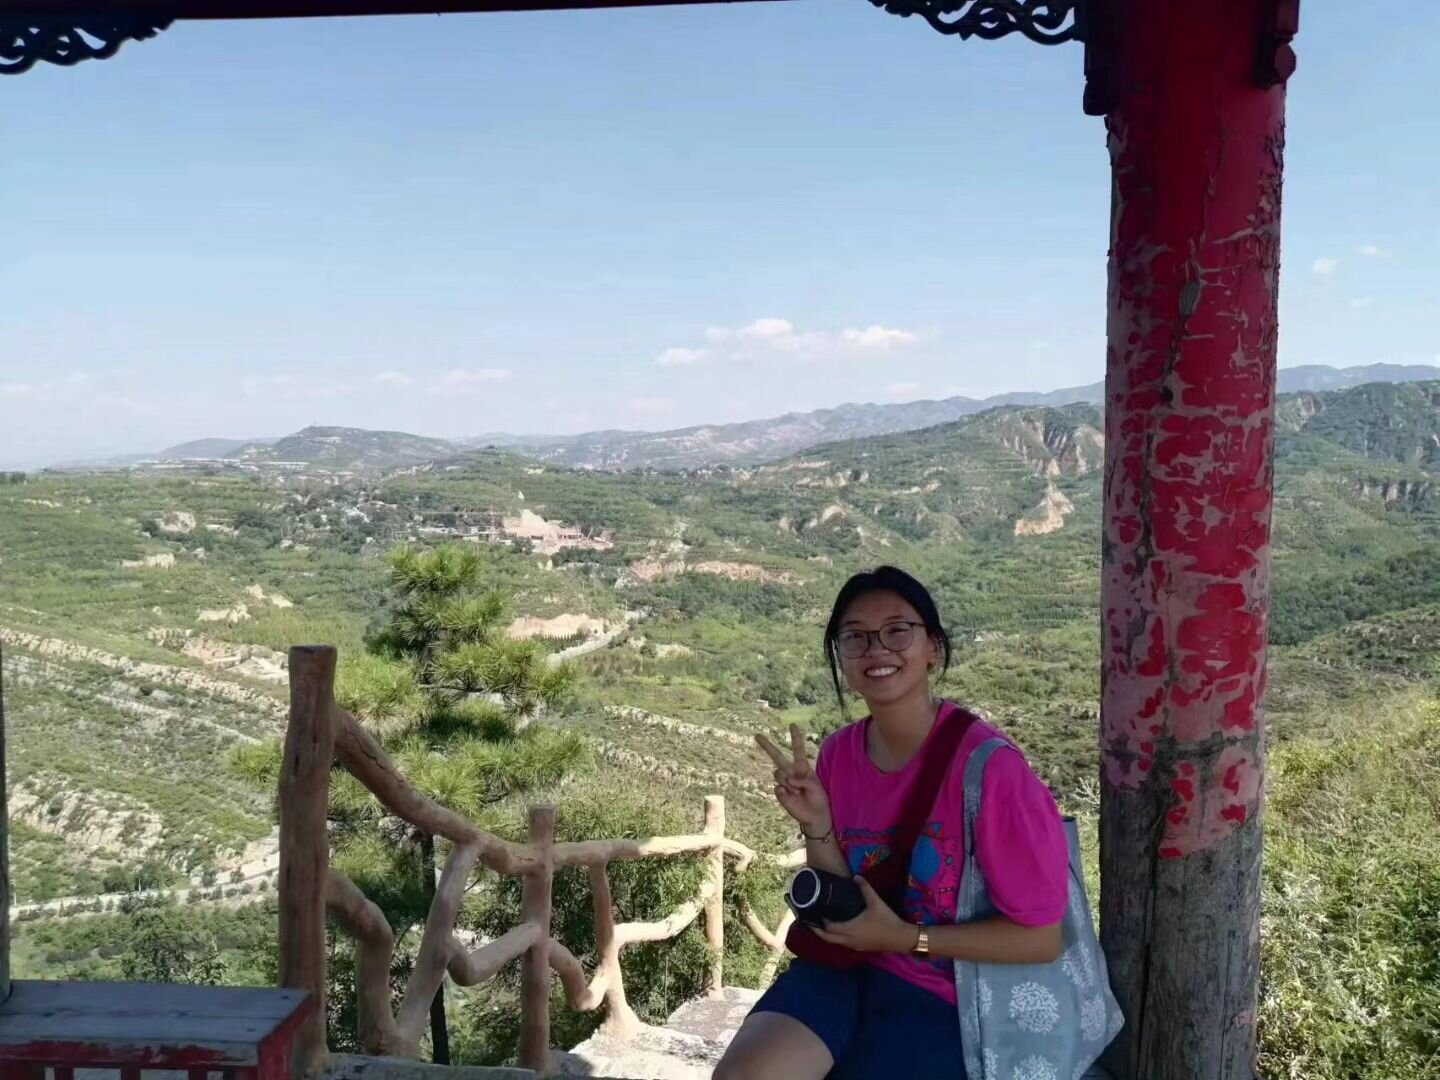 Hi everyone, my name is Elaine and I'll be taking over this week🌞 I am actually a third (!!) year China fellow, and I just arrived in Taigu about a month and a half ago. Being presented with the opportunity to extend this fellowship and actually com